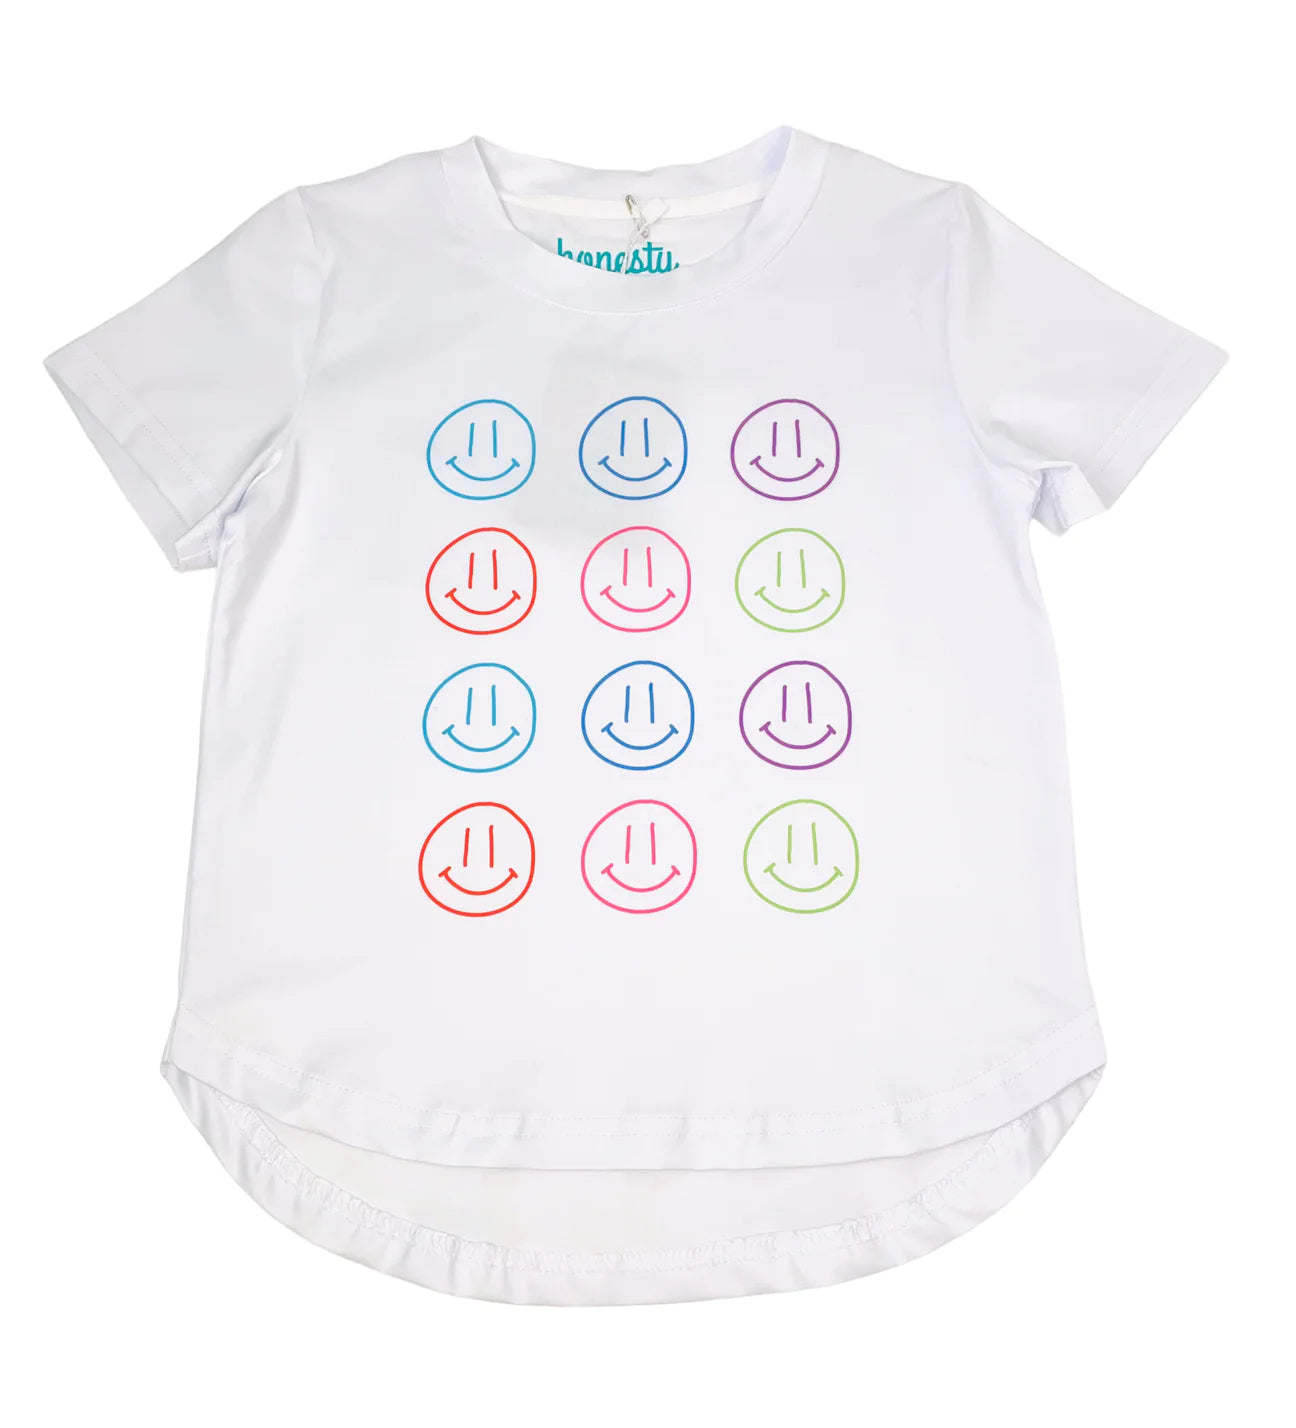 All Smiles Performance Tee  - Doodlebug's Children's Boutique